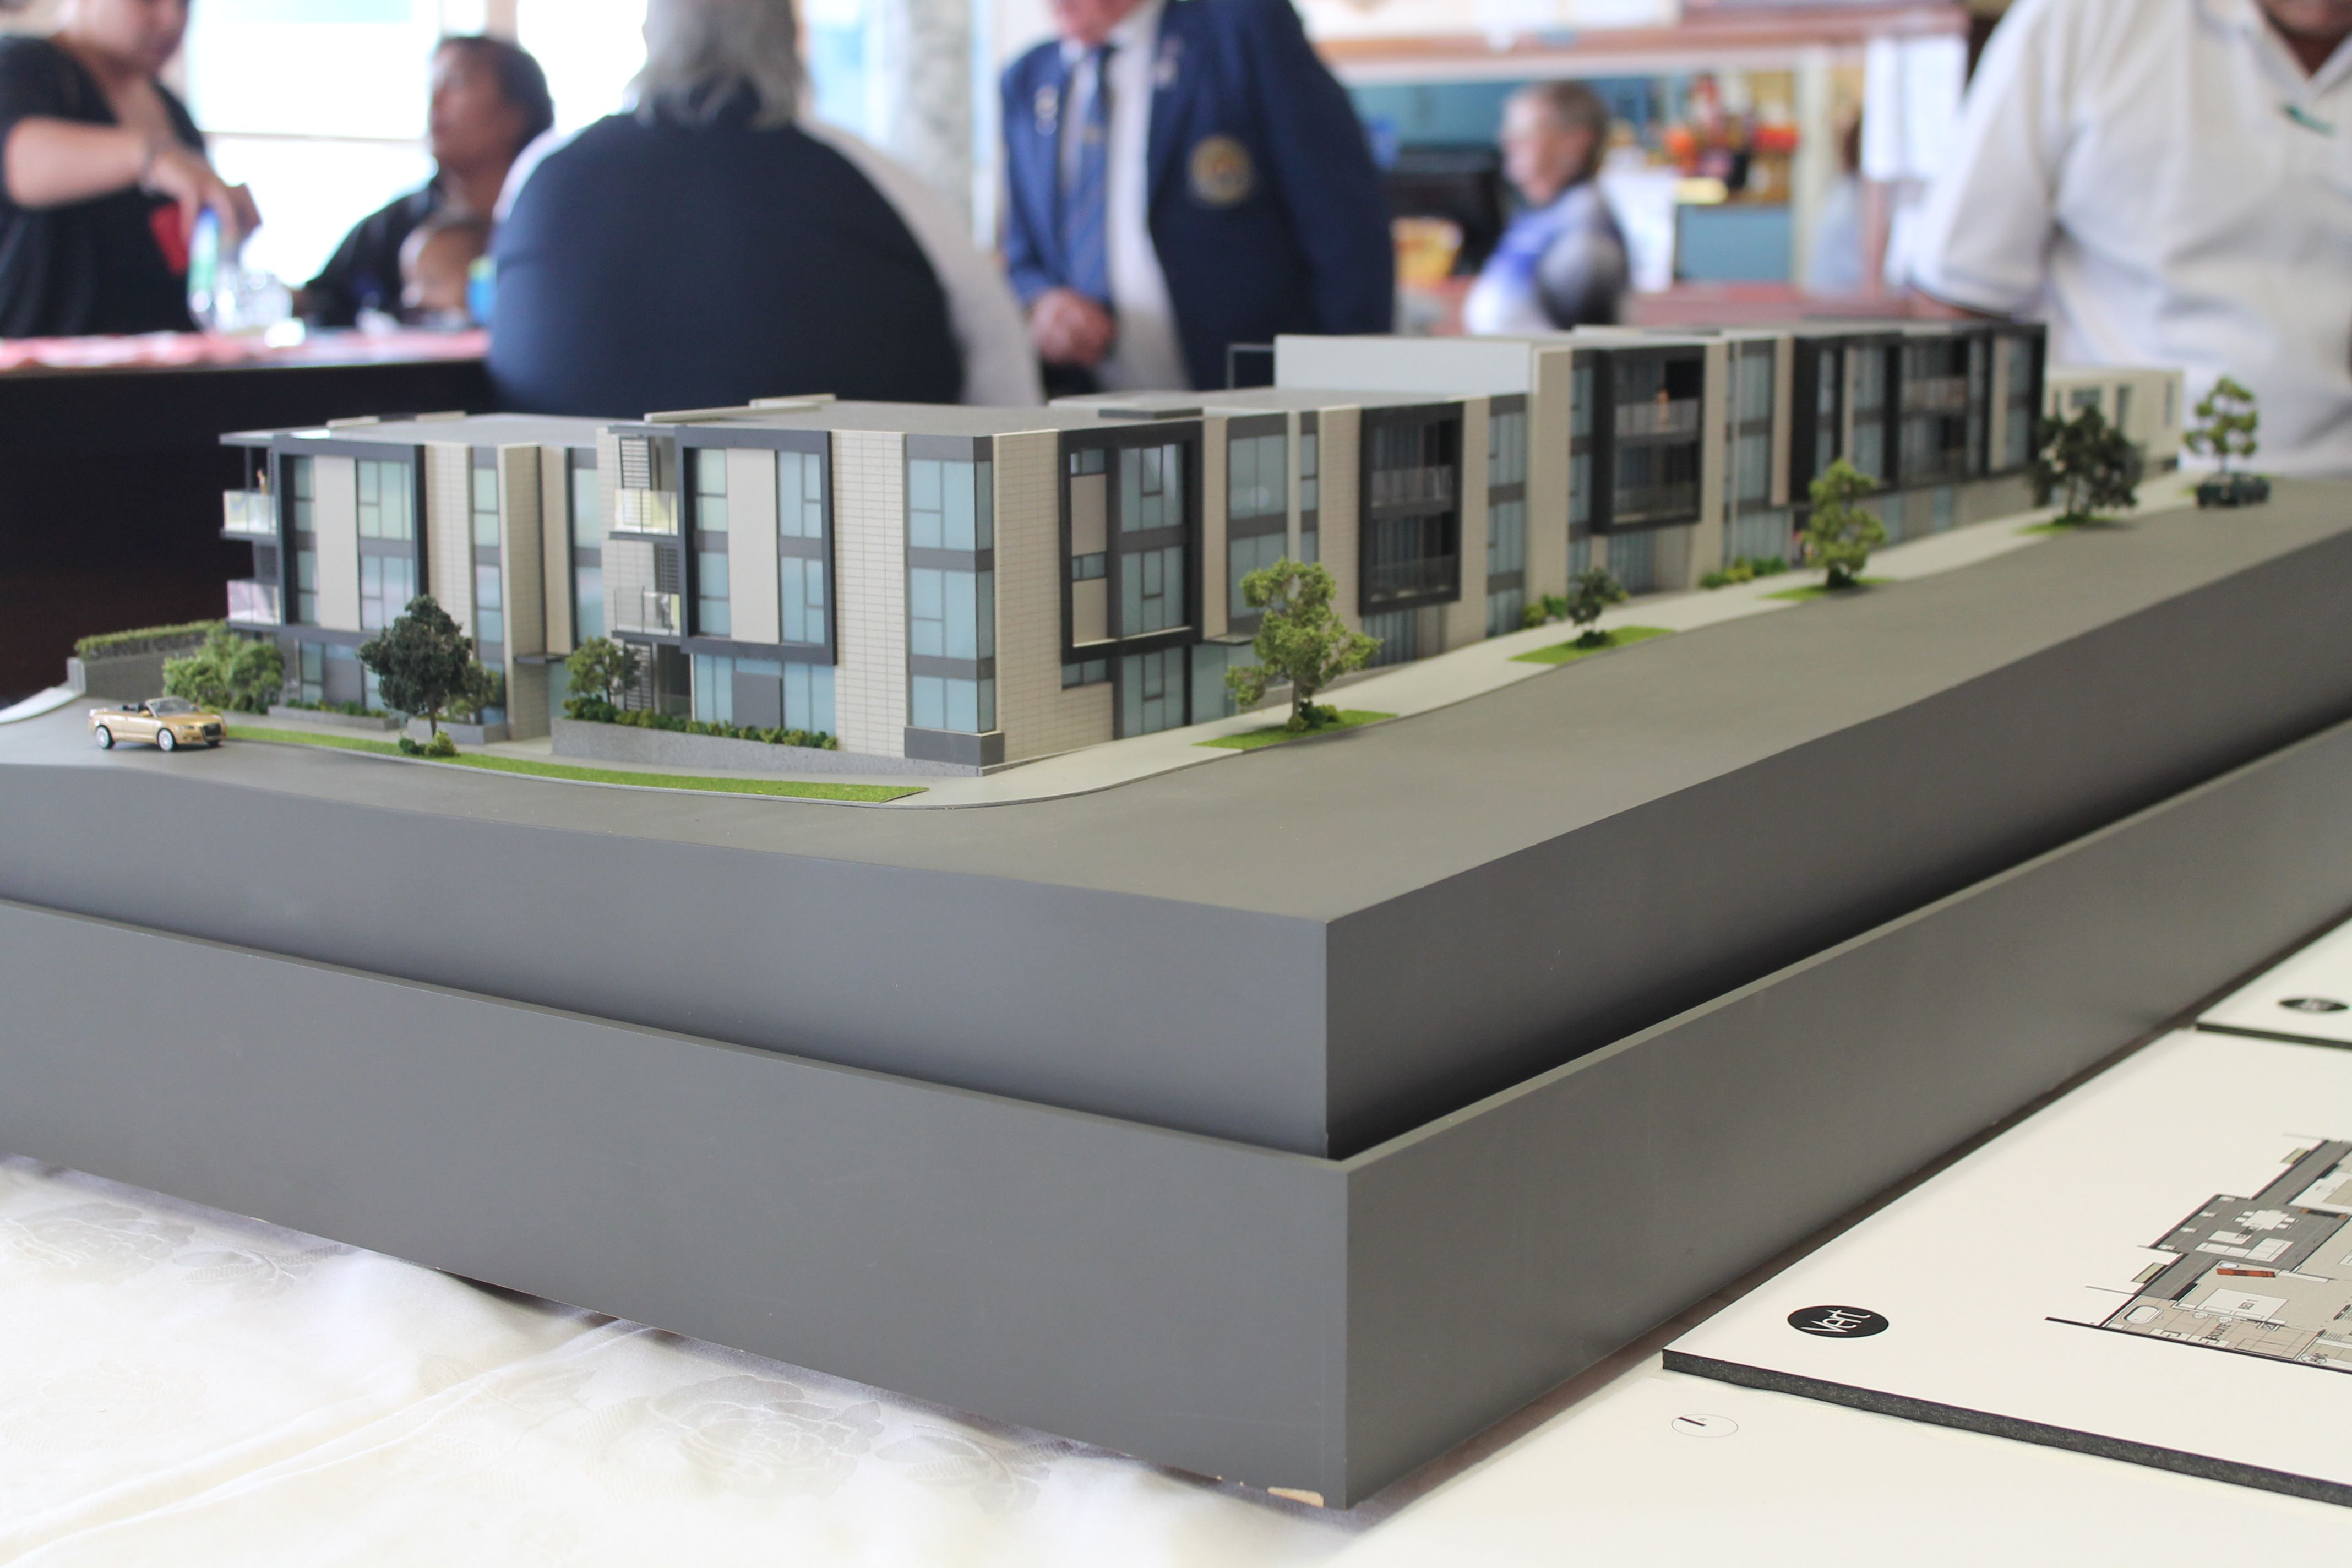  The Original Plan / Model of the new complex.